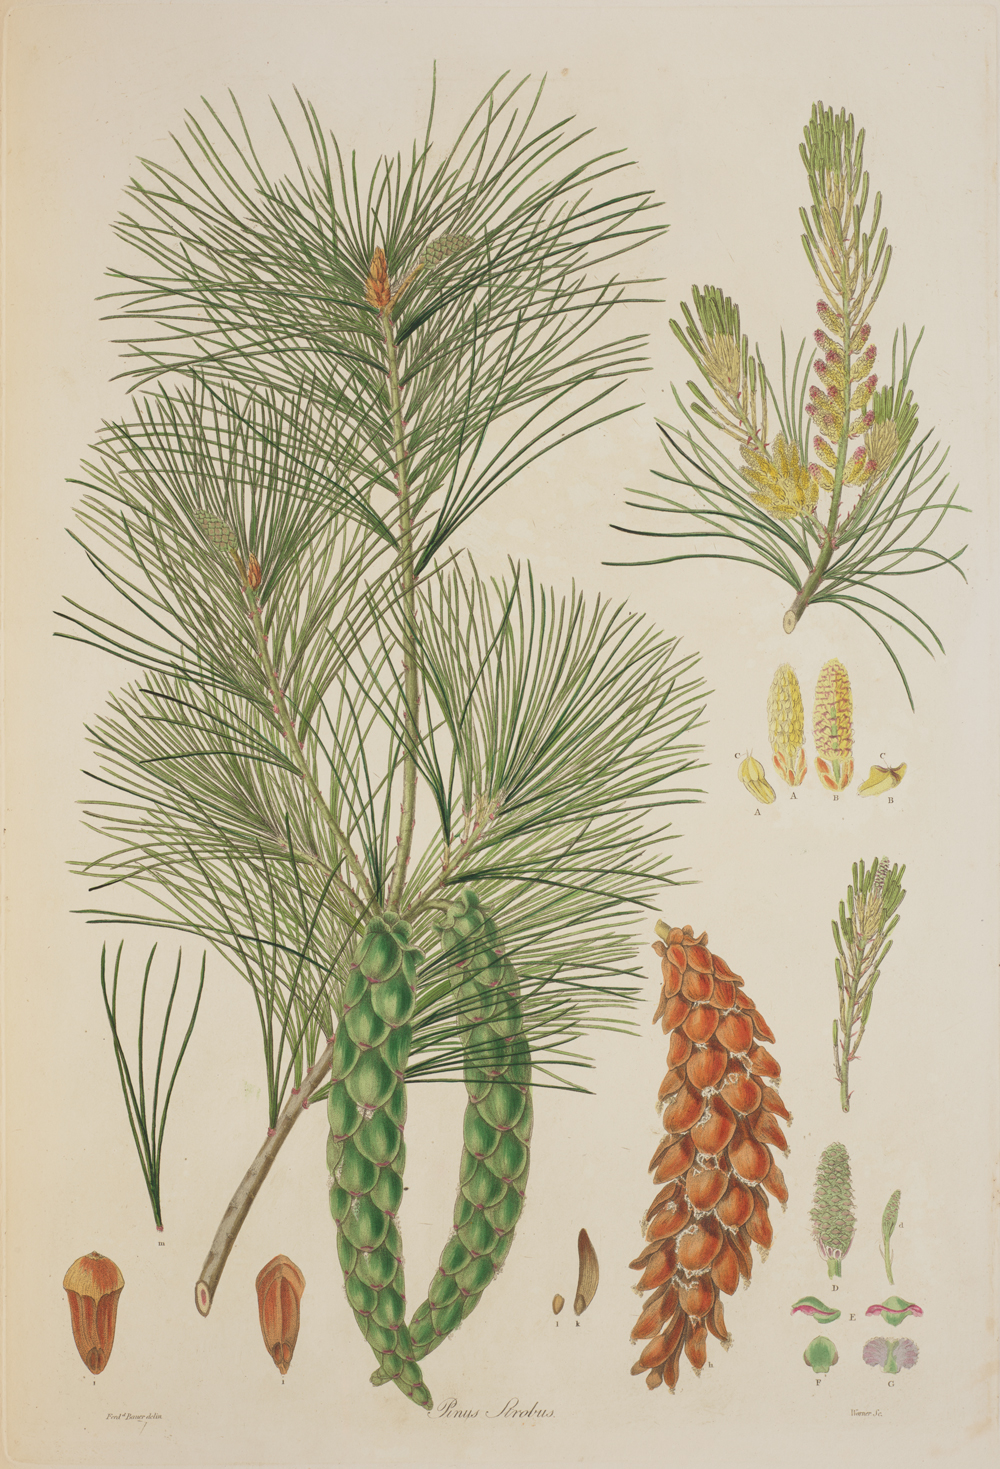 A full-color botanical illustration of various parts of a pine tree.